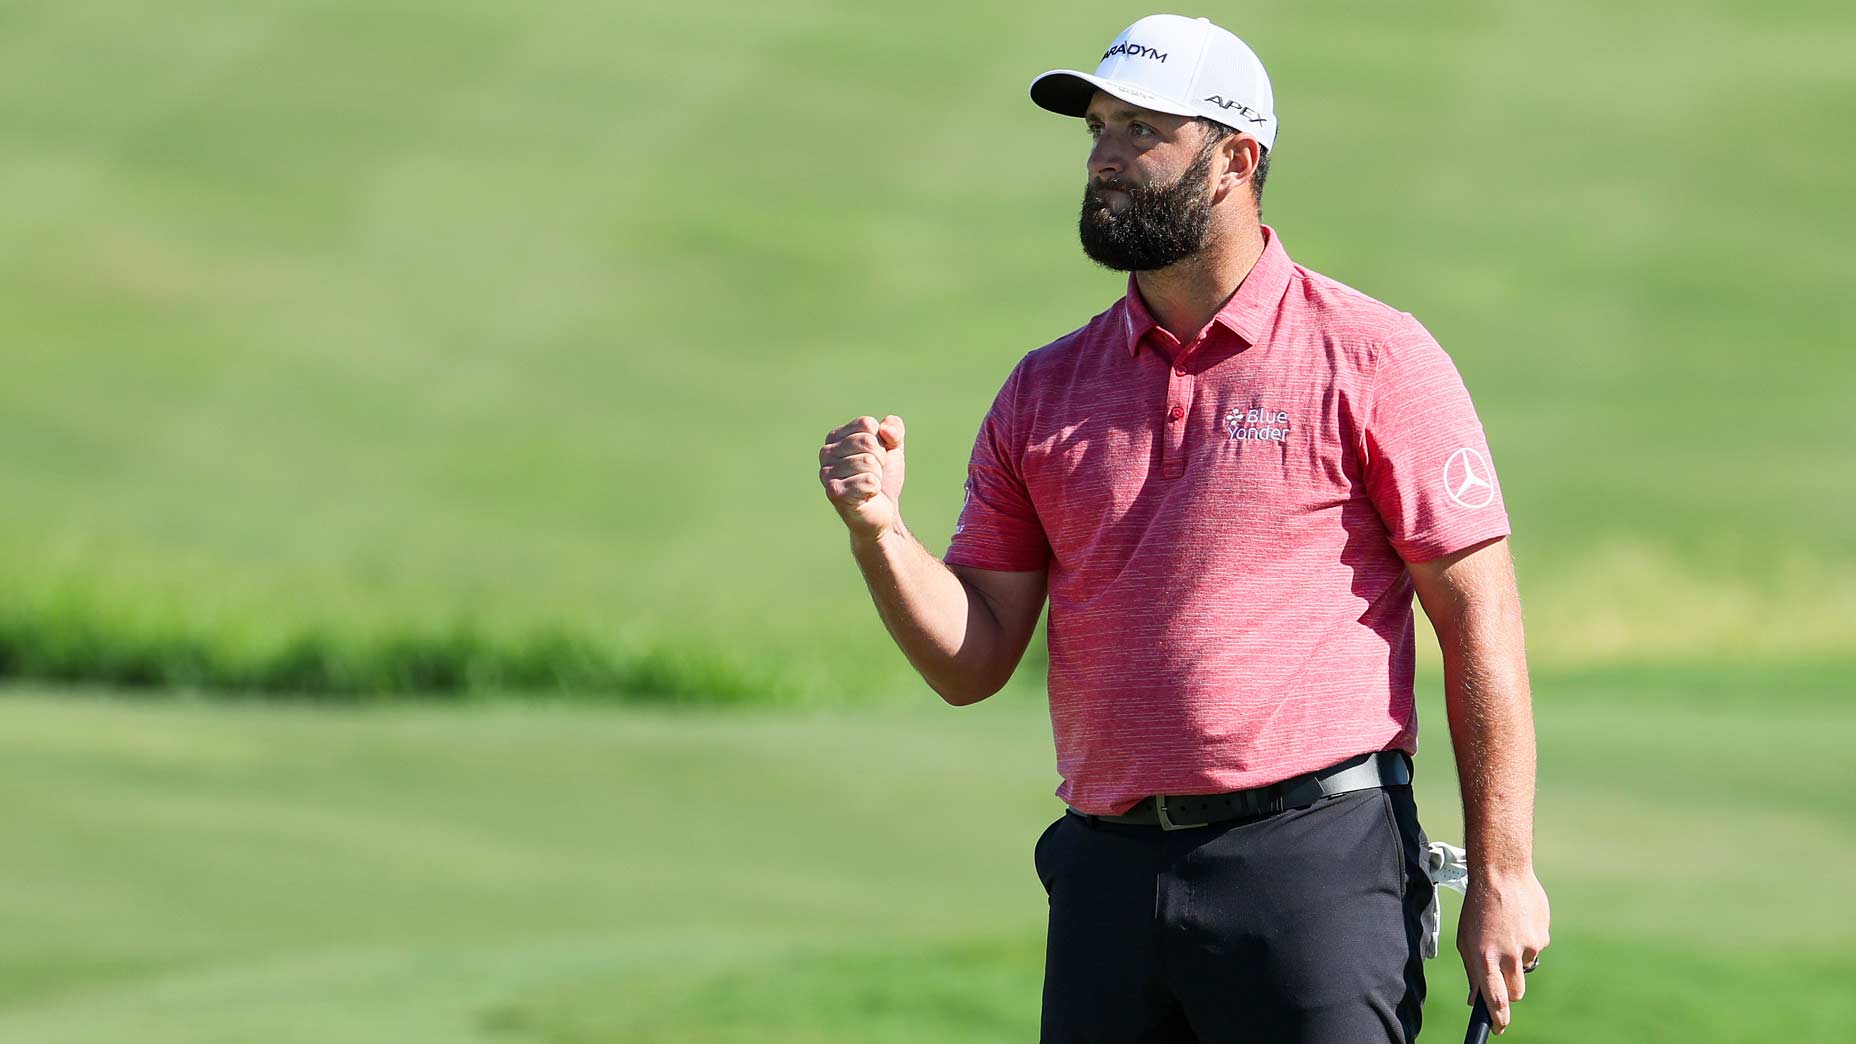 Jon Rahm comes back to win Sentry TOC as Morikawa collapses